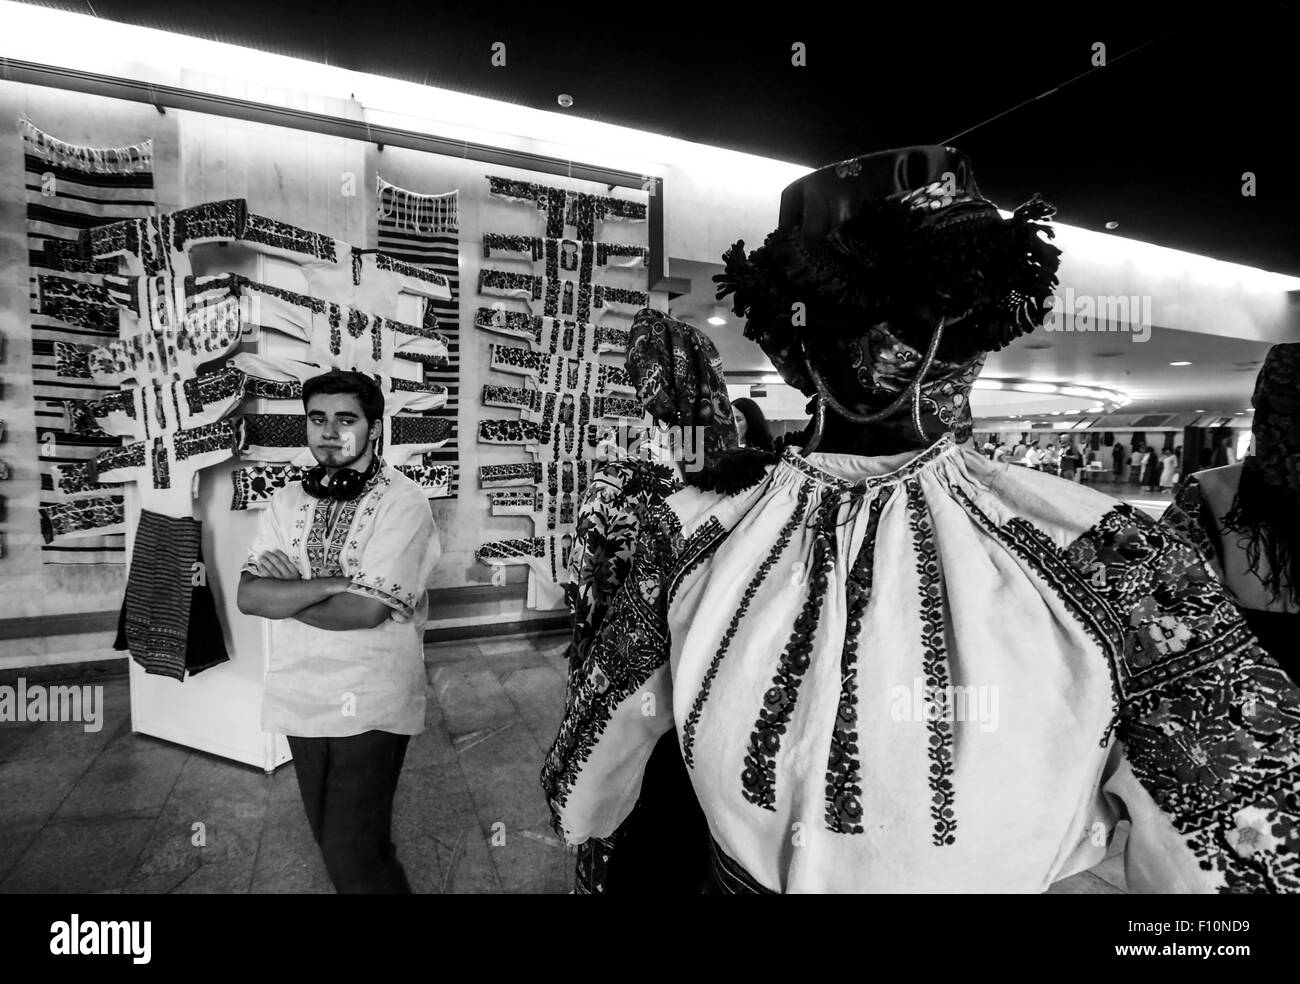 Kiev, Ukraine. 24th Aug, 2015. Customers visiting the exposition of the Ukrainian national costume at the exhibition, which opened on Independence Day. -- Thousands of Ukrainians celebrate the 24 anniversary of Independence of Ukraine mass festivities in towns and villages across the country. This holiday marred by Russian aggression in the east of Ukraine and the occupation of the Crimea. Ukrainians are hoping that 25 Independence Day they will meet in a more peaceful environment. © Igor Golovnov/Alamy Live News Stock Photo